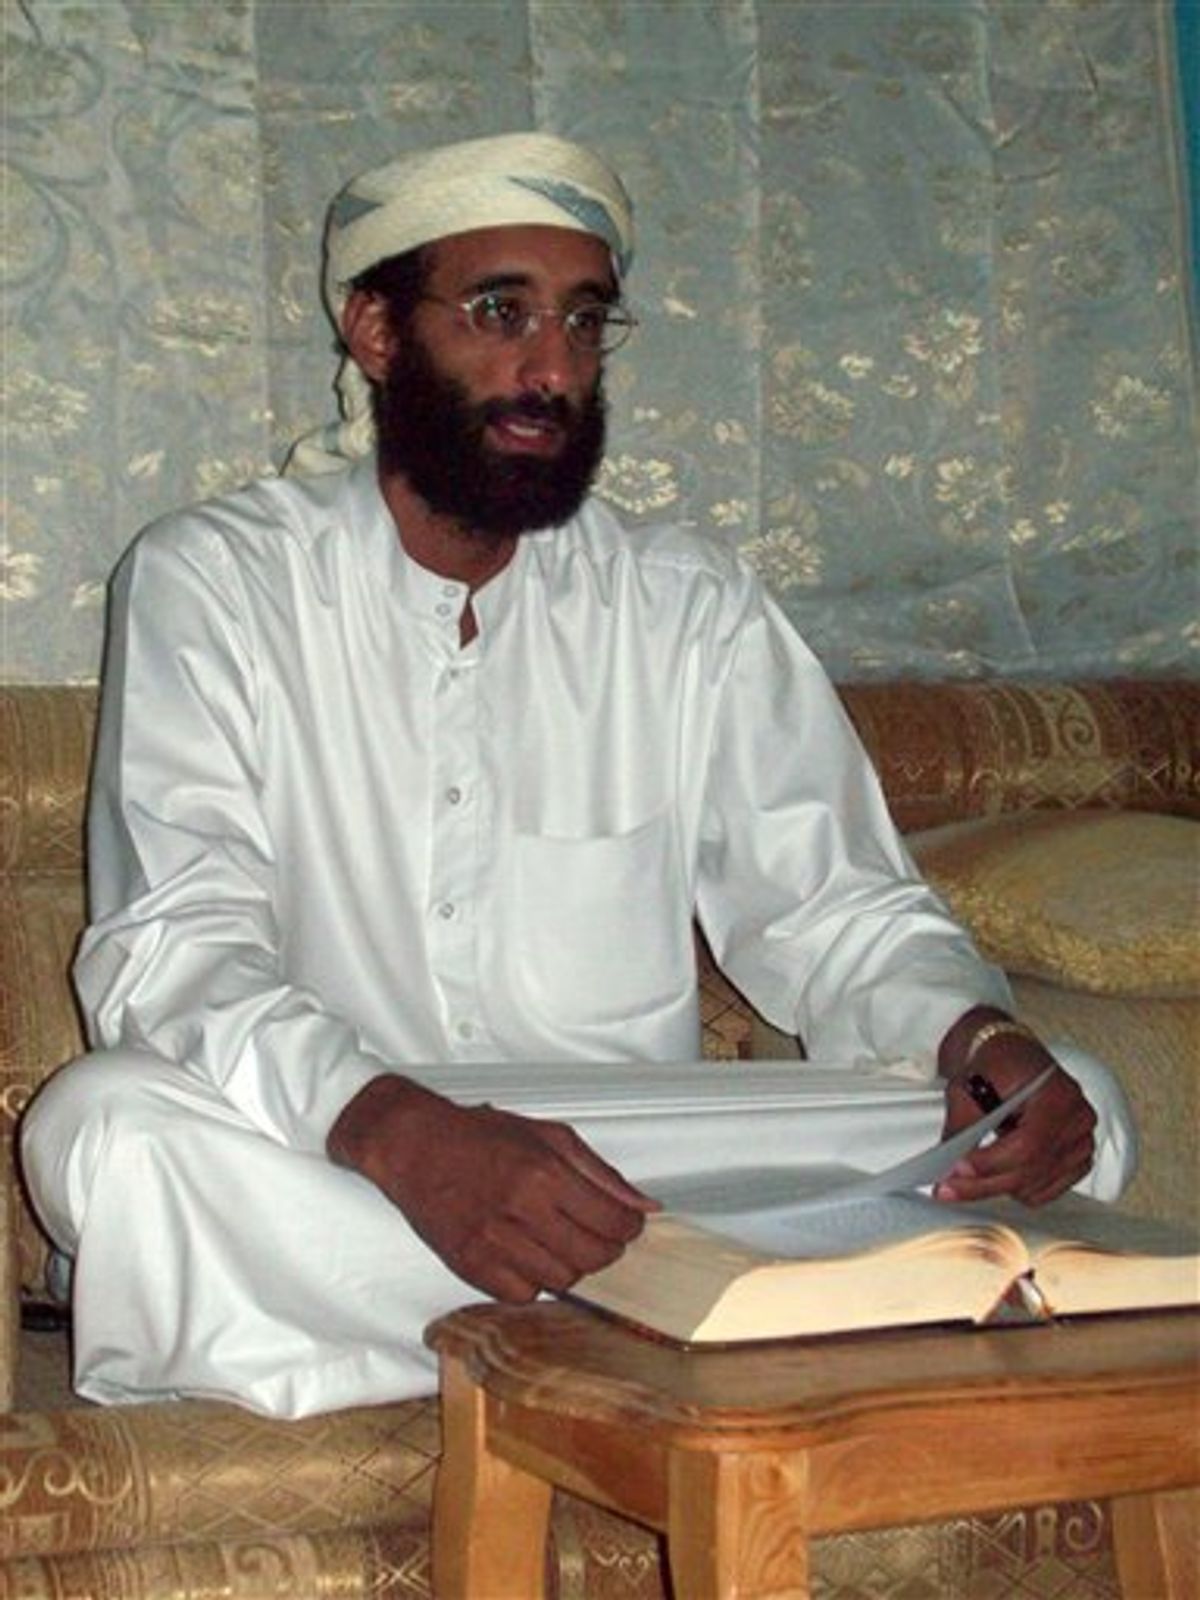 FILE - This Oct. 2008 file photo provided by Muhammad ud-Deen shows Imam Anwar al-Awlaki in Yemen. Al-Awlaki, an American-Yemeni cleric whose Internet sermons have helped inspire attacks on the U.S. is advocating the killing of American civilians in a new al-Qaida video posted Sunday, May 23, 2010. (AP Photo/Muhammad ud-Deen, File)   (AP)